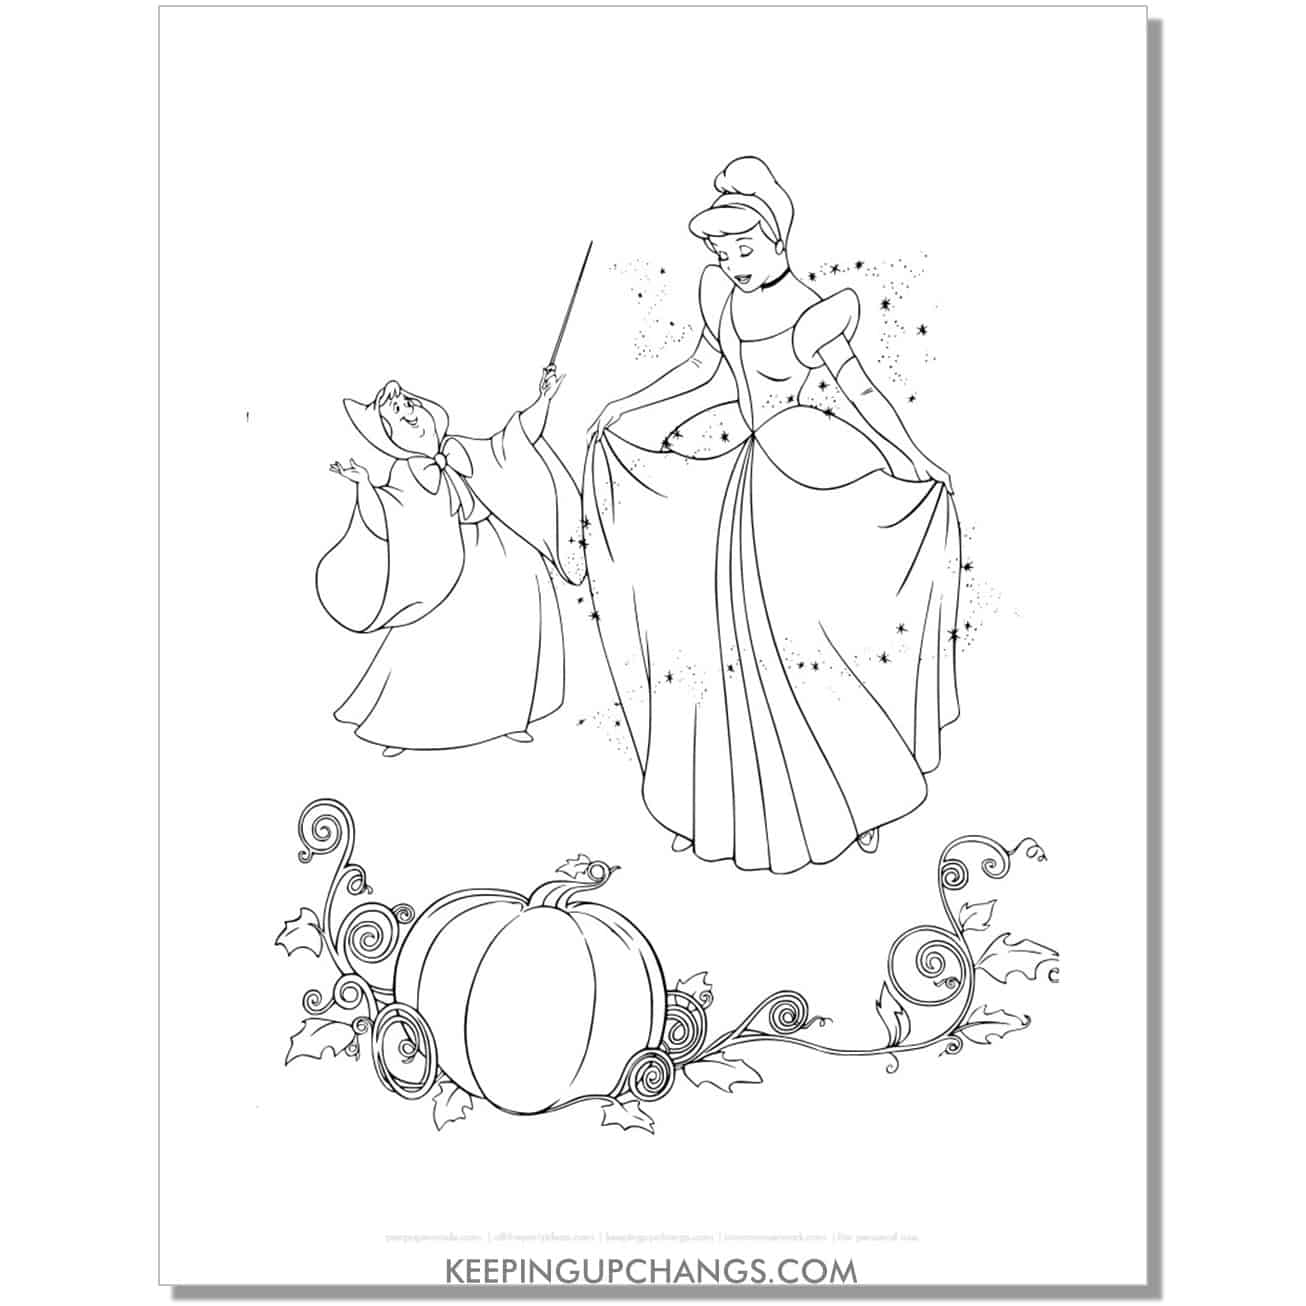 cinderella dressed up by fairy godmother coloring page, sheet.